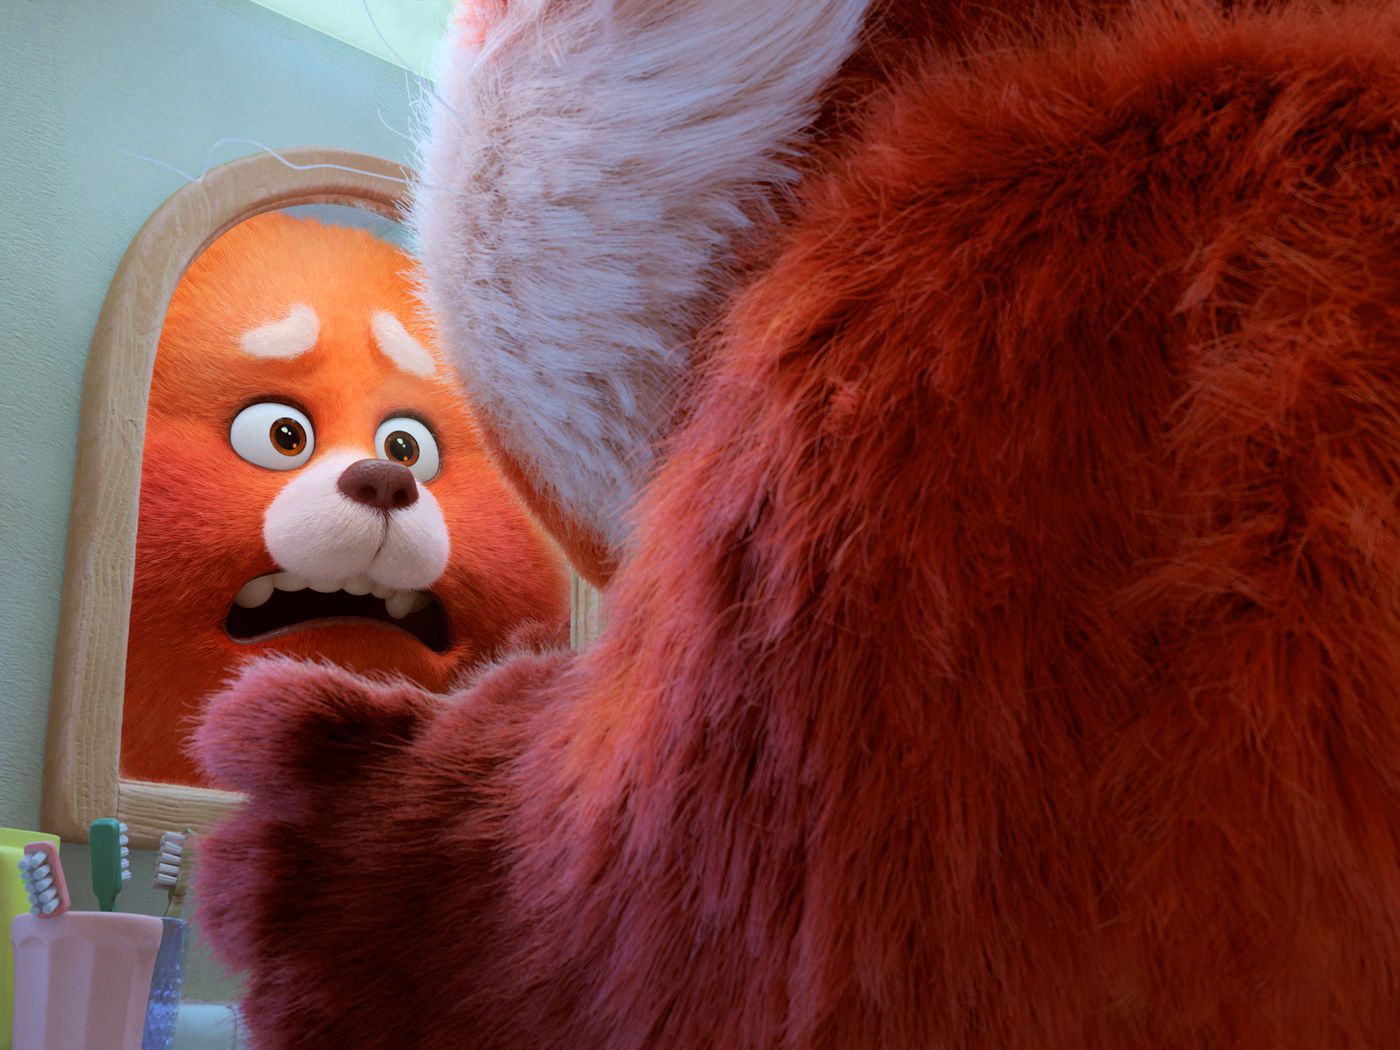 Pixar's Turning Red trailer: Anxiety, overbearing moms, and a giant panda